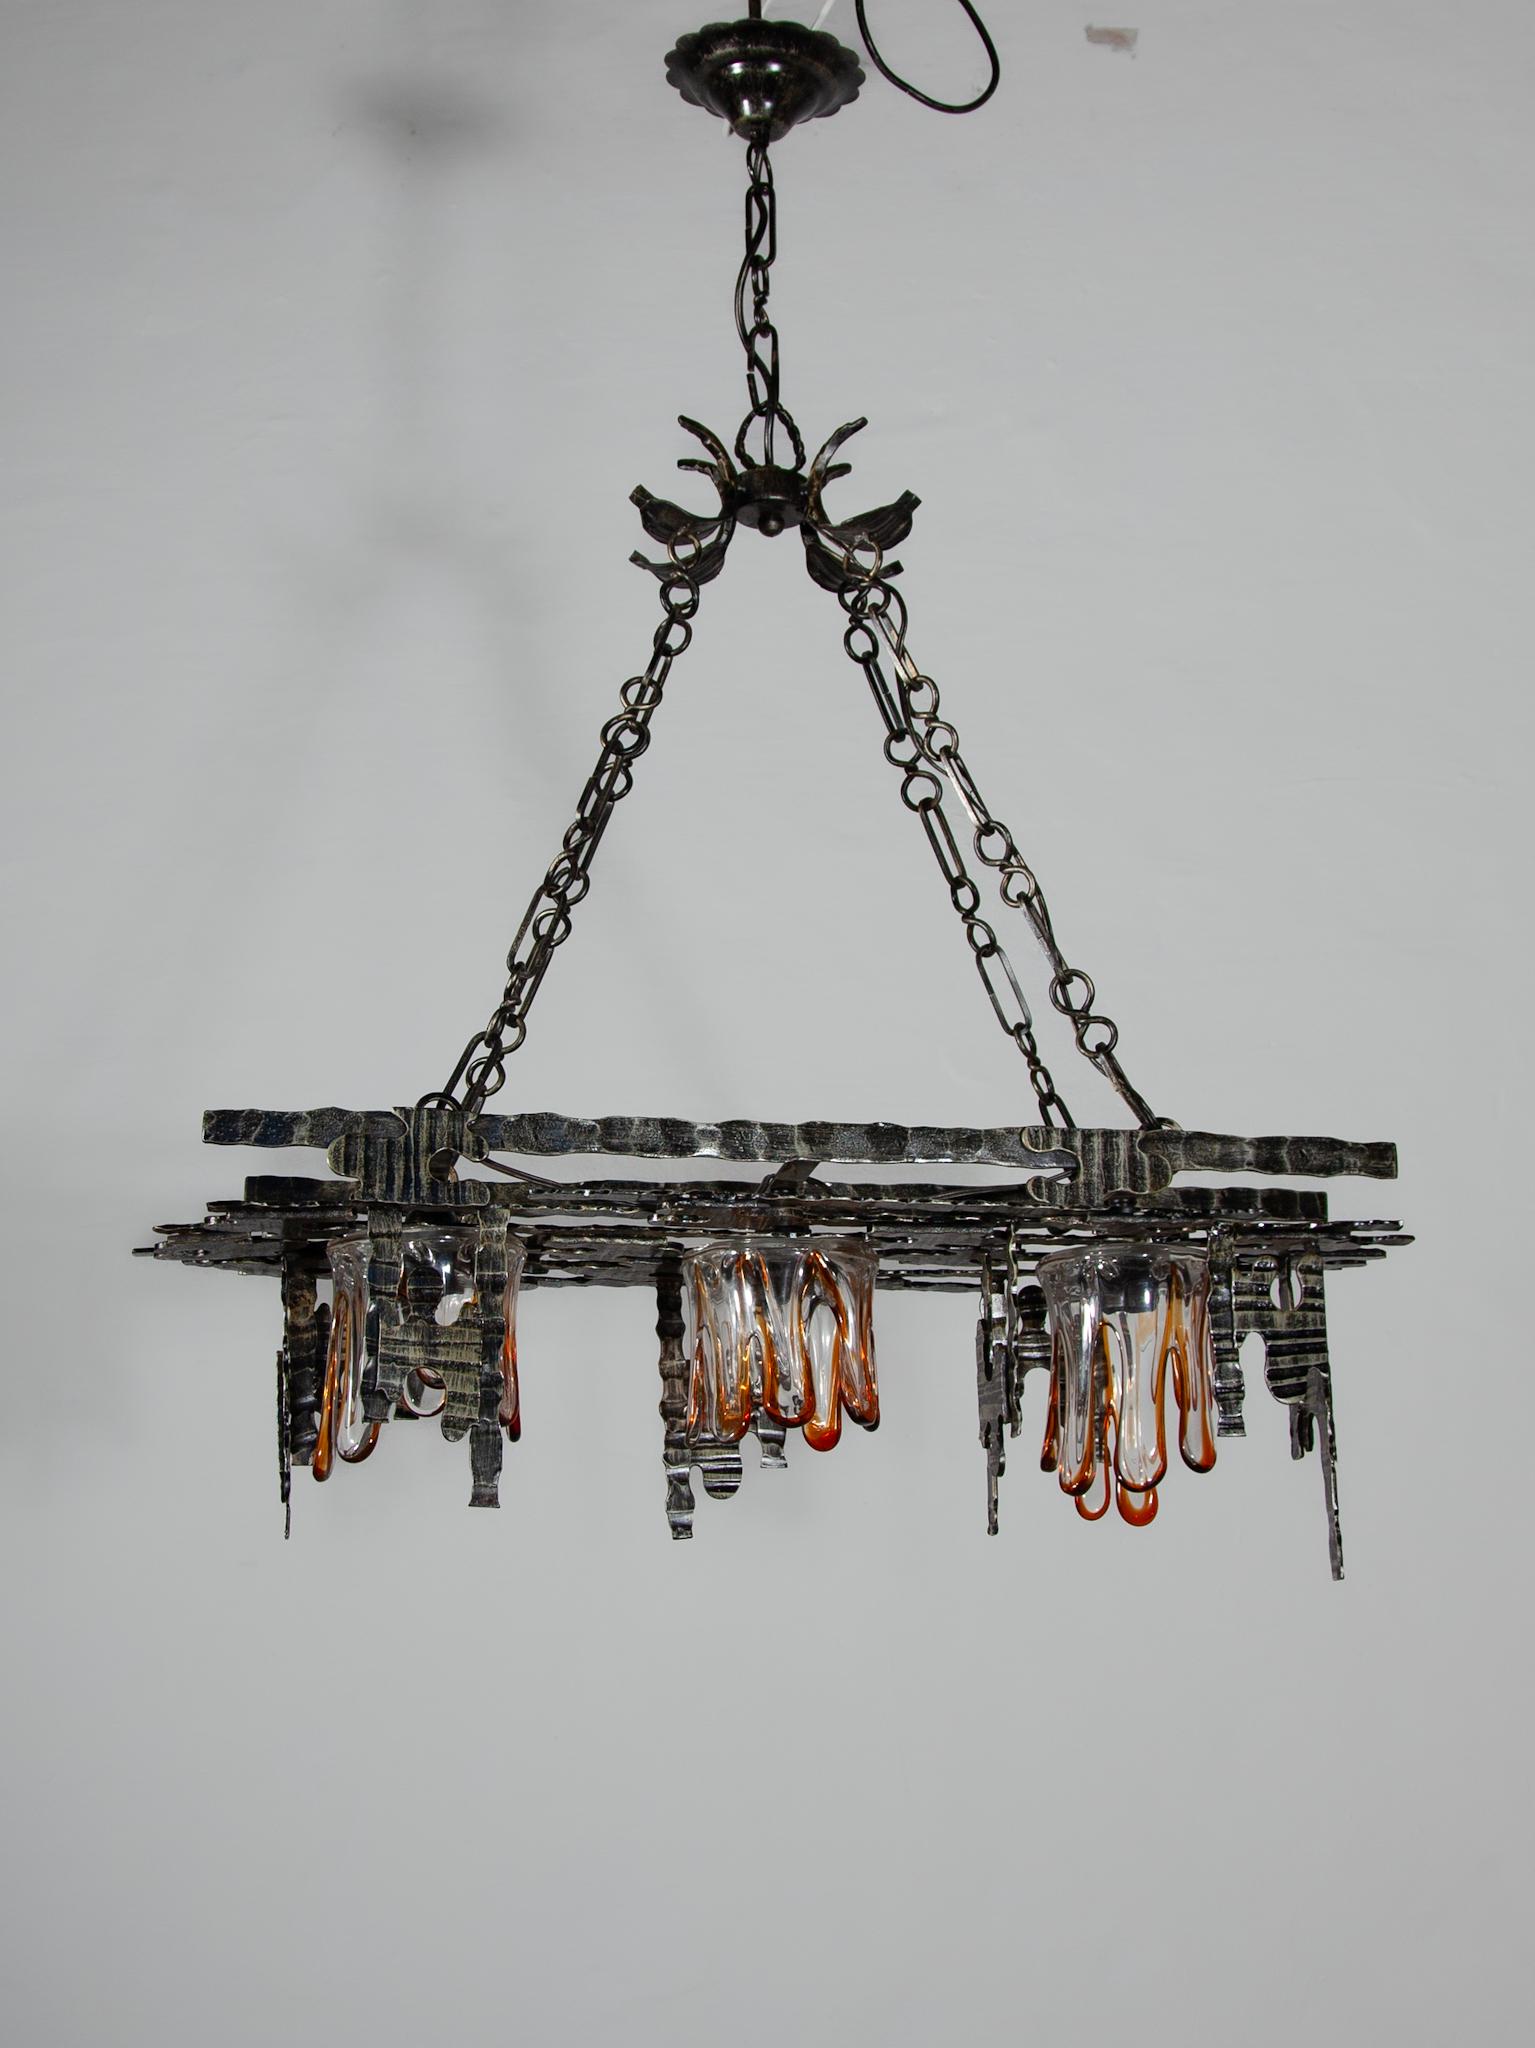 Rare unique rectangular wrought iron brutalist chandelier with 3 caps mouth blown clear glass and amber designed by the following designers Tom Ahlström & Hans Ehrlich,Sweden, 1970s.